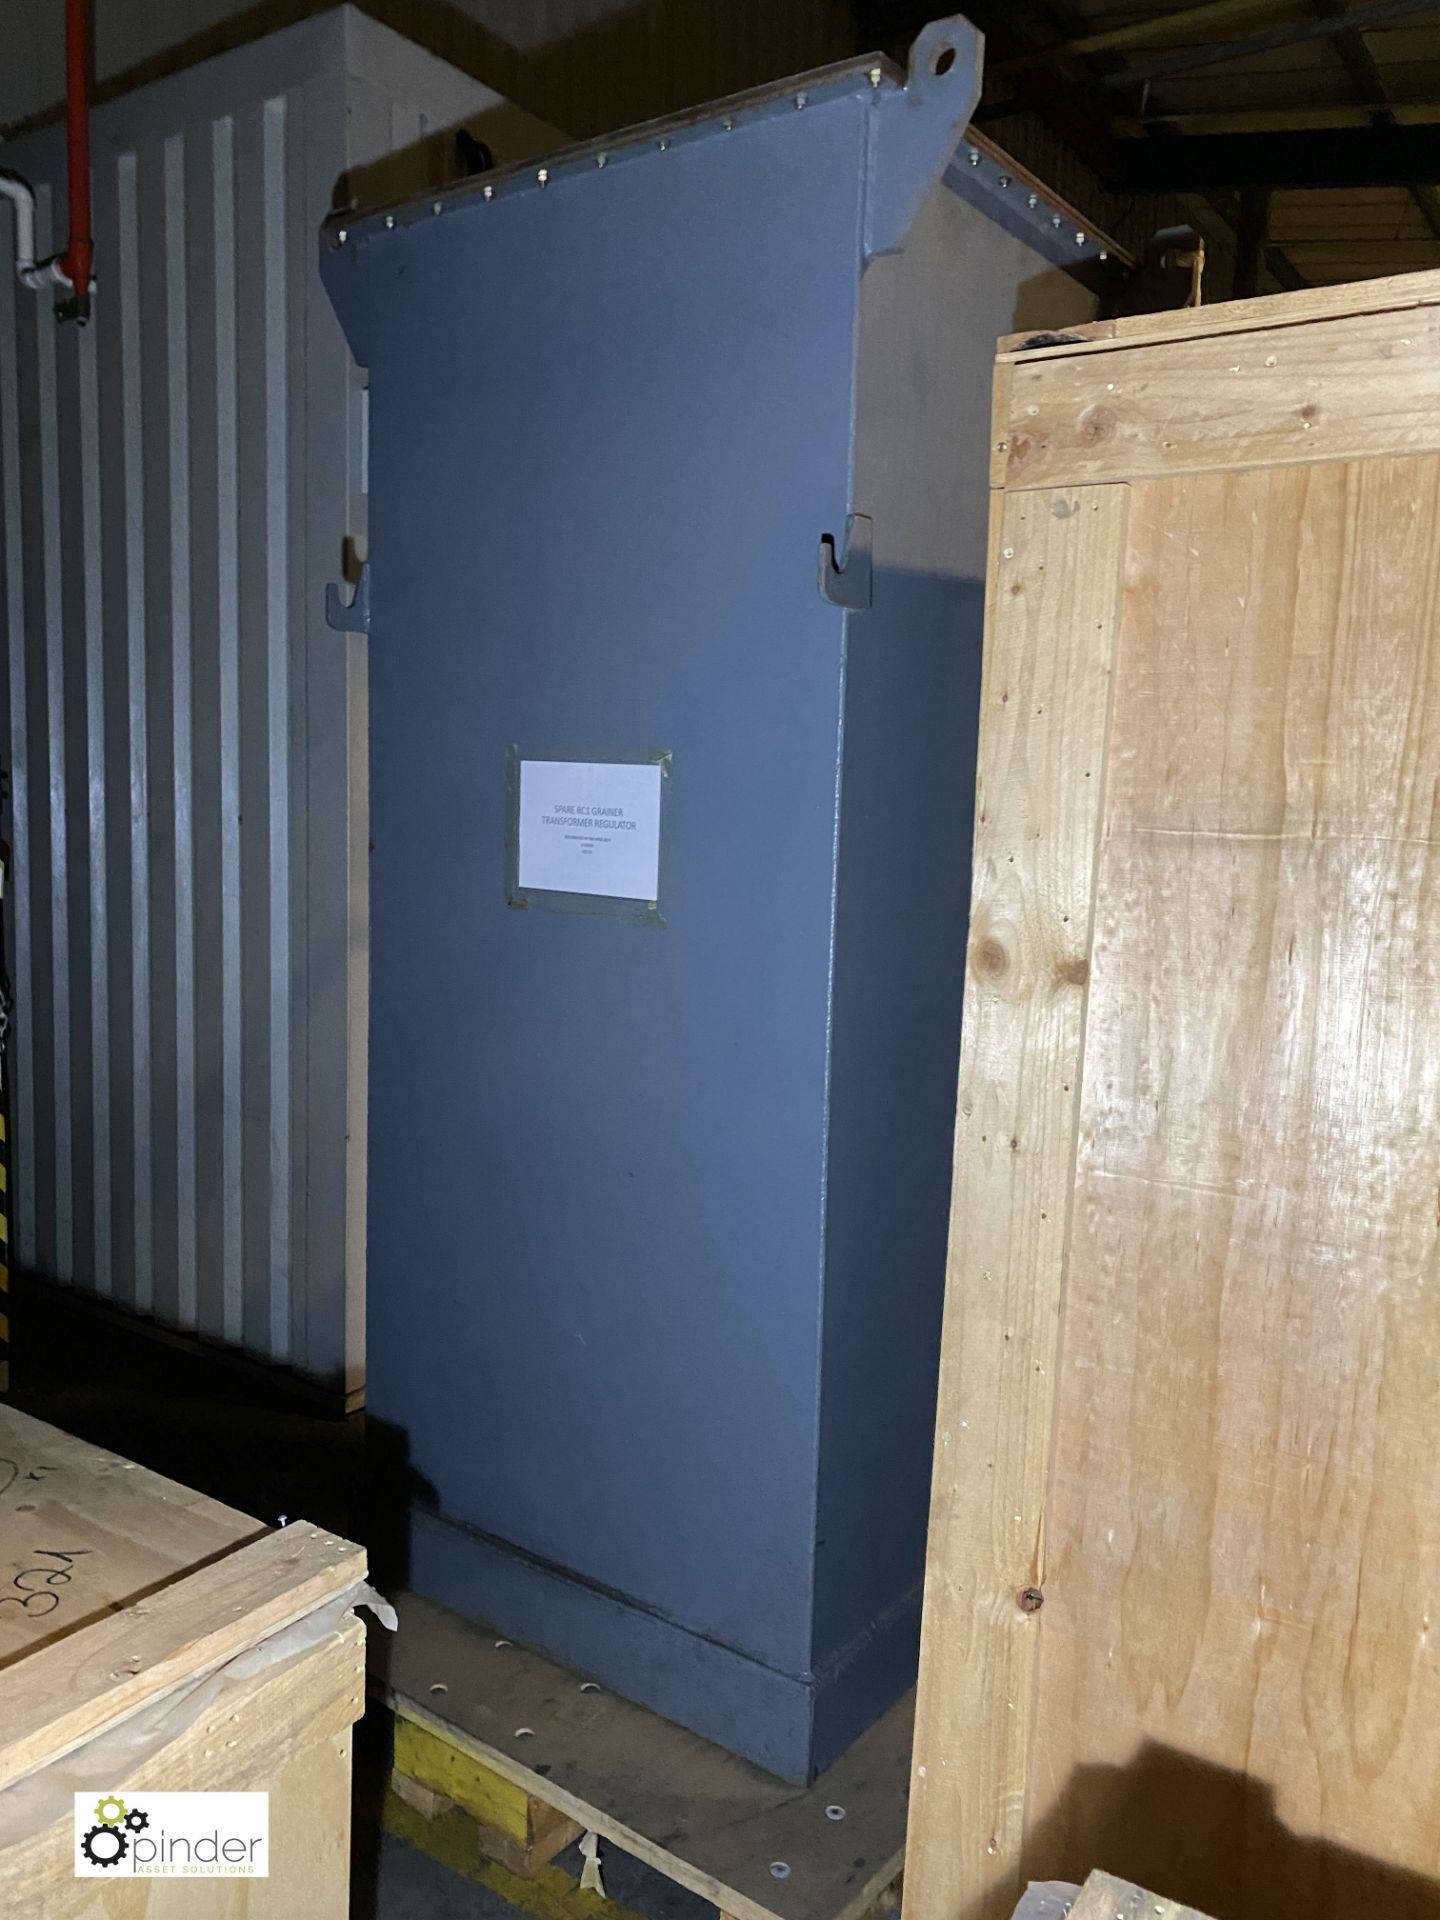 Transformers and Rectifiers Ltd RZOAQ 4X180/415/415 Regulating Auto Transformer, 66.7kva, phase 1, - Image 5 of 5